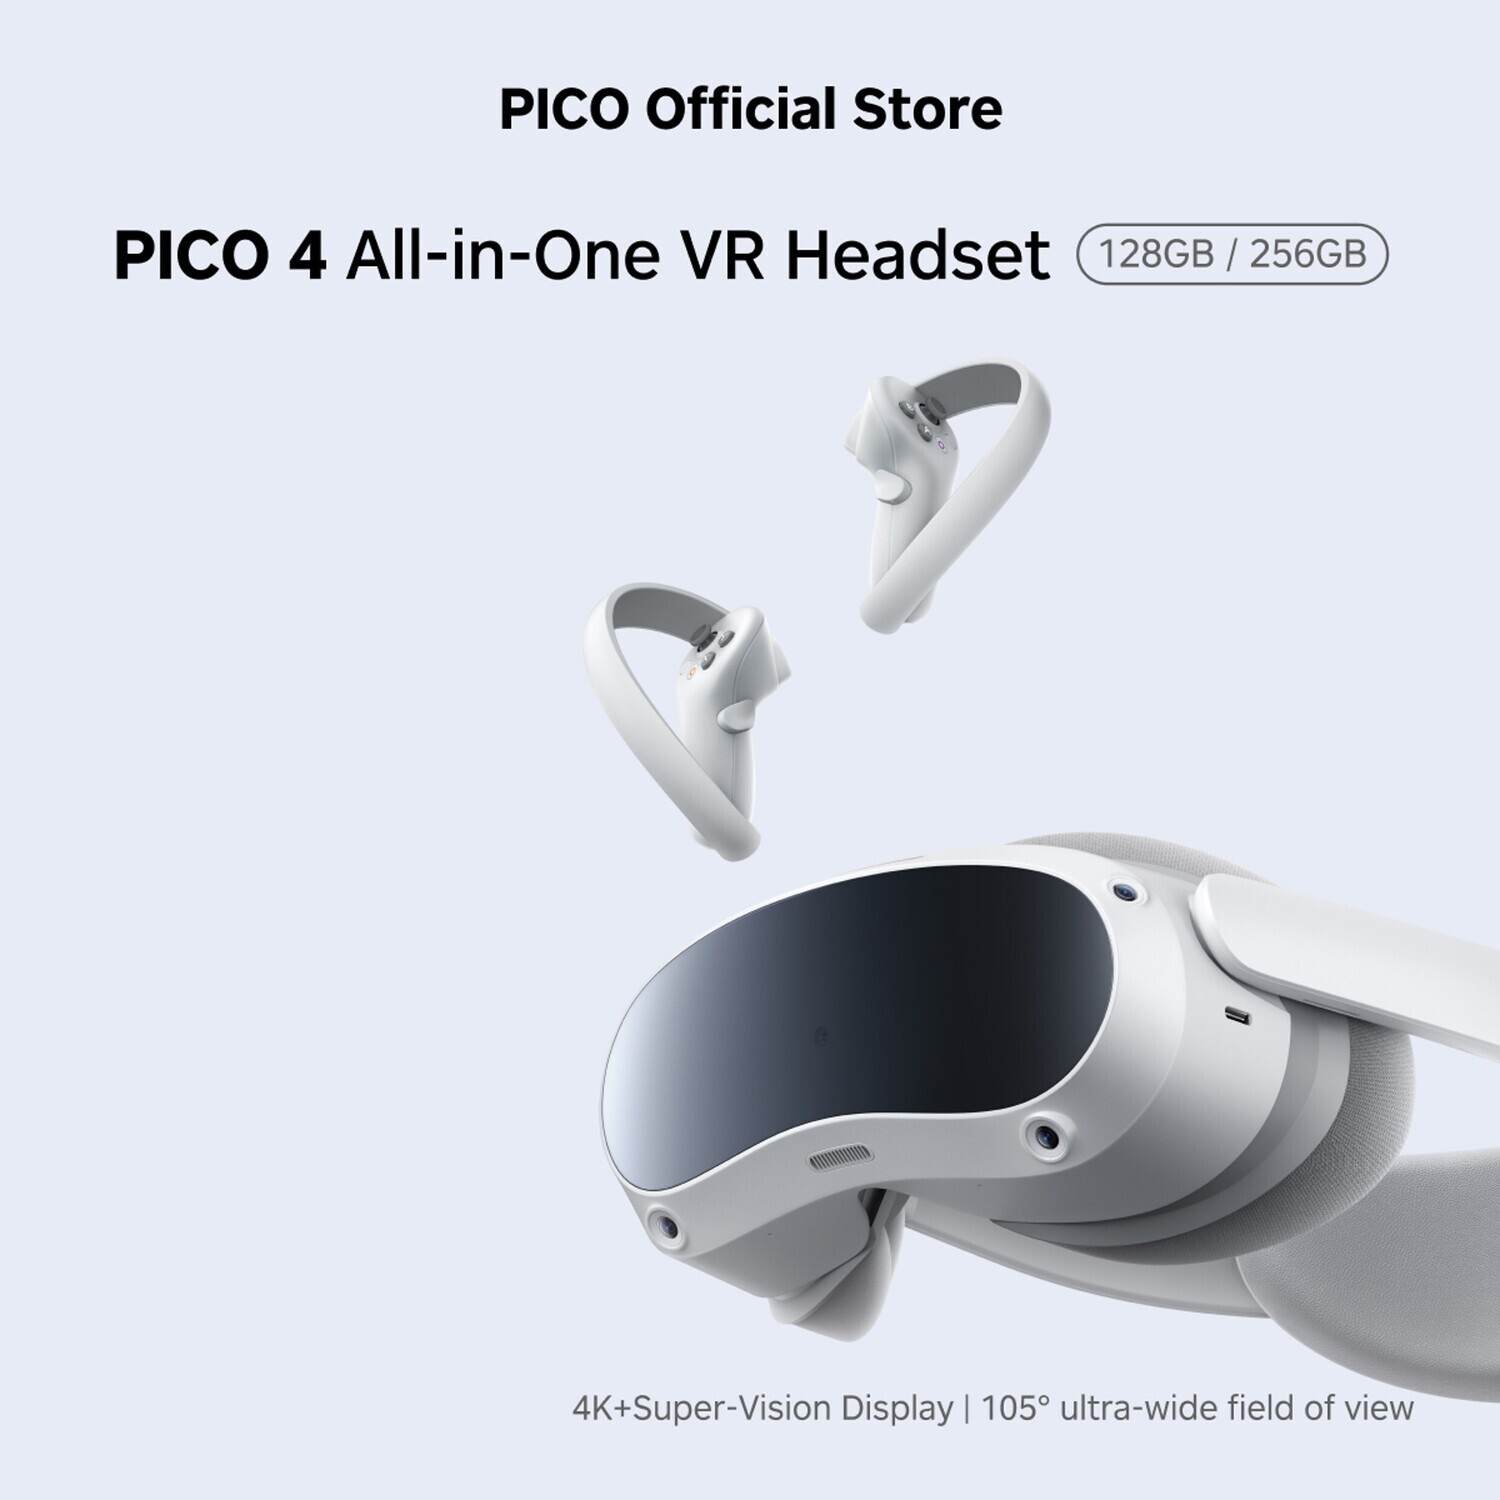 PICO 4 8/128GB All-In-One 4K+ Resolution VR Headset